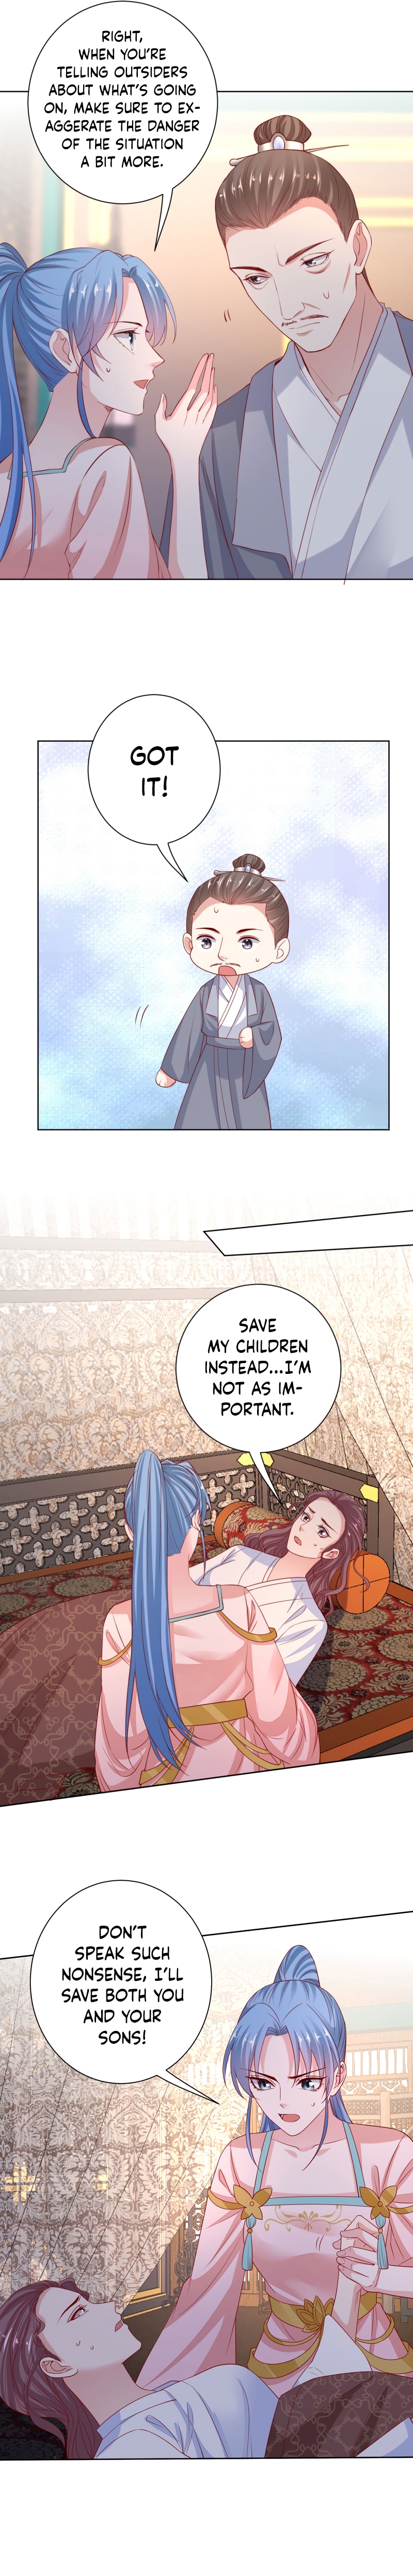 Poisonous Doctor: First Wife’s Daughter chapter 201 page 4